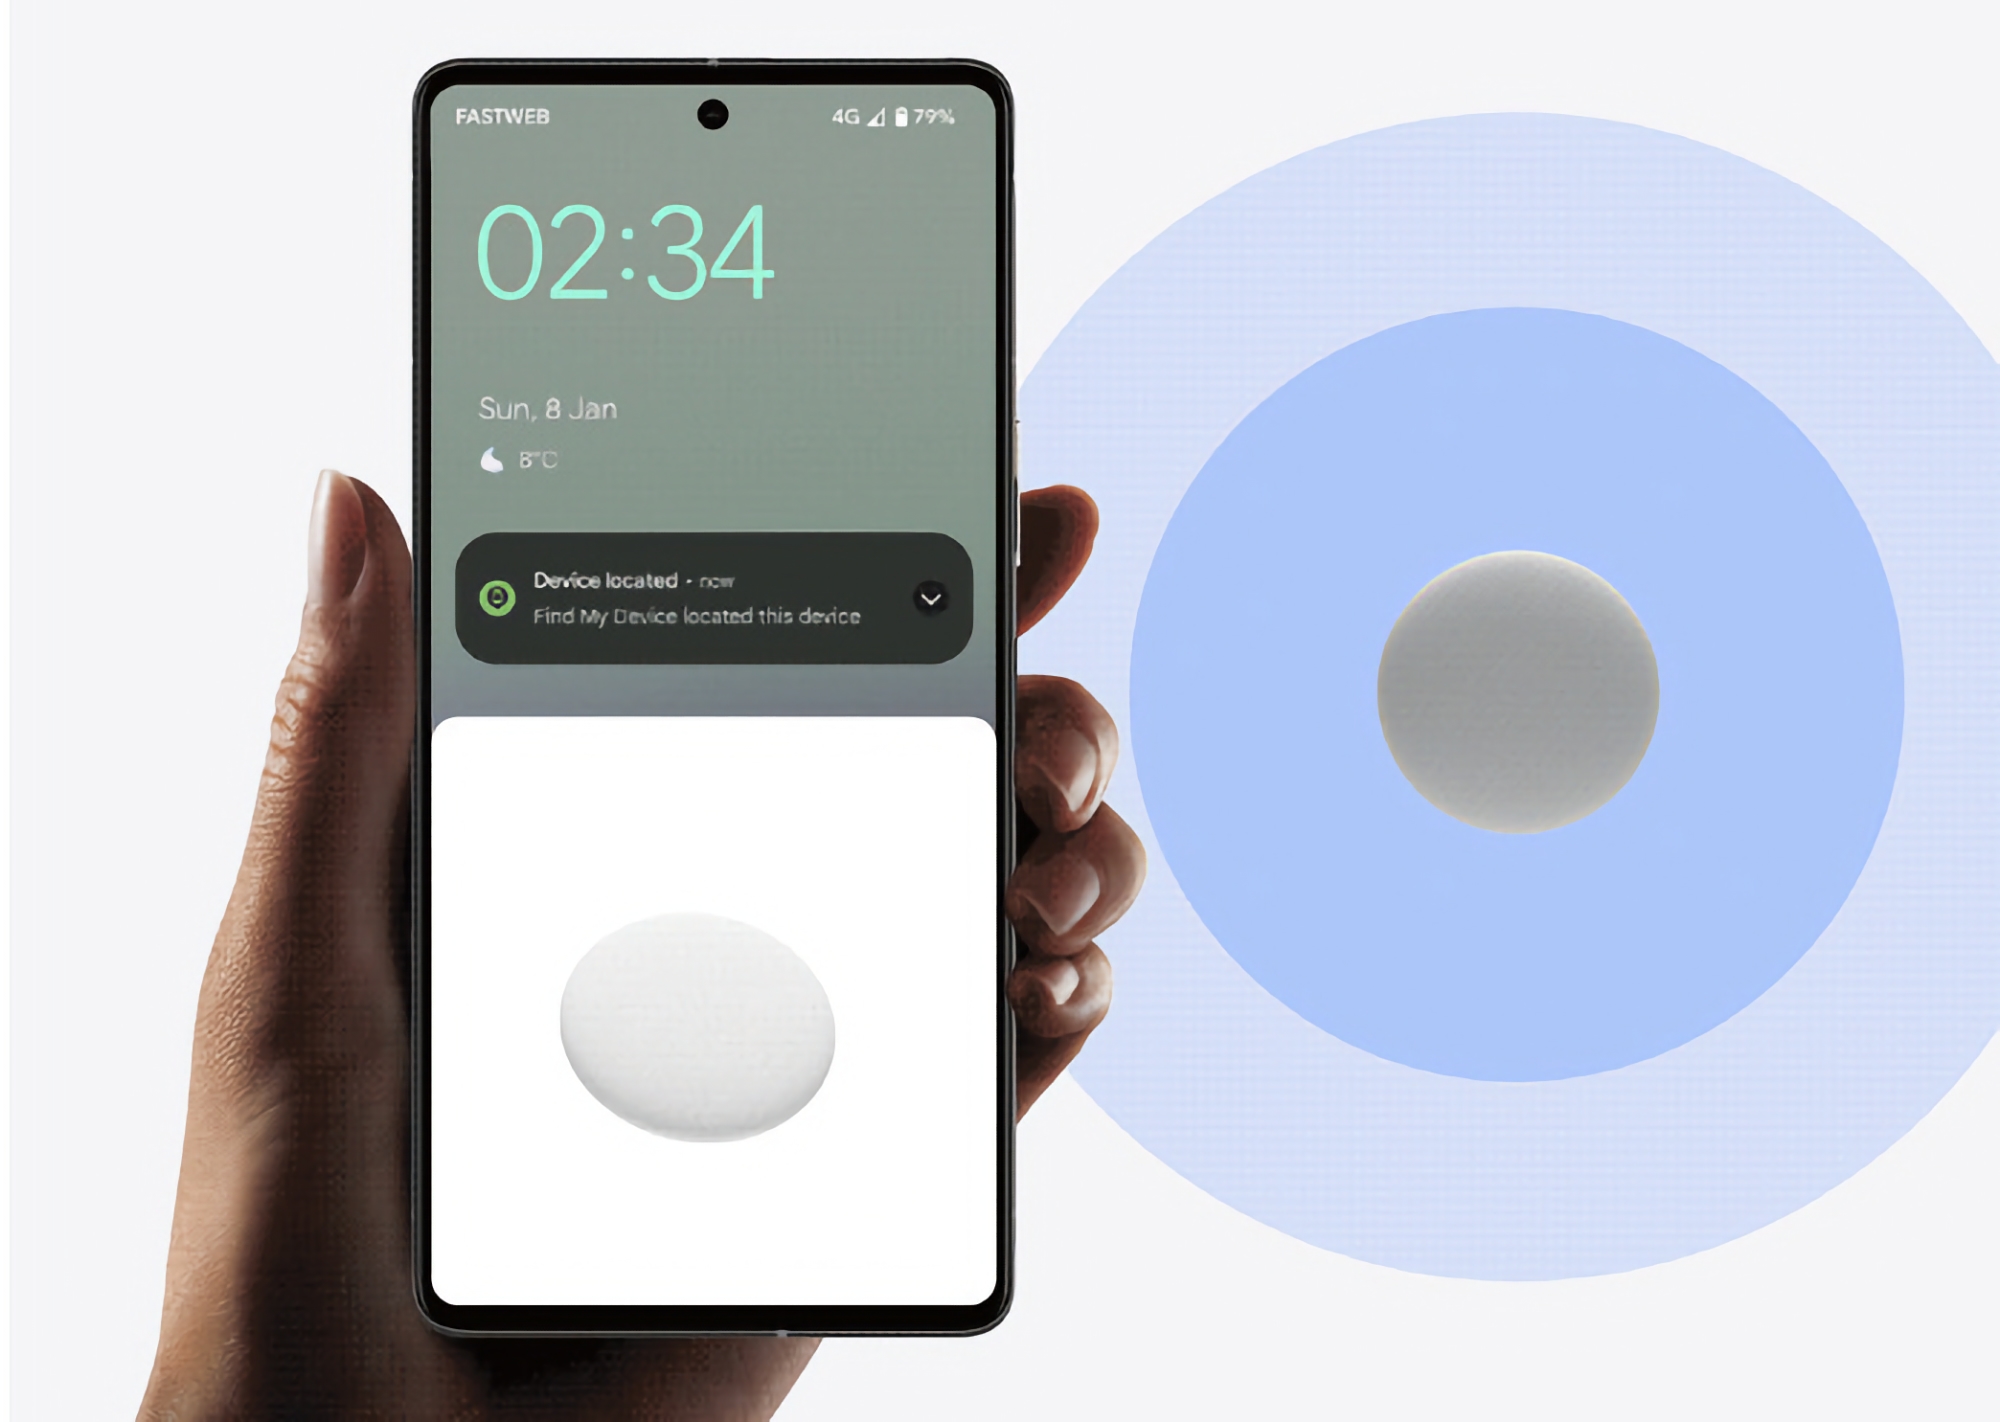 Samsung Galaxy SmartTag and Apple AirTag analogue: Google is working on a tracker to find items, it is code-named Grogu